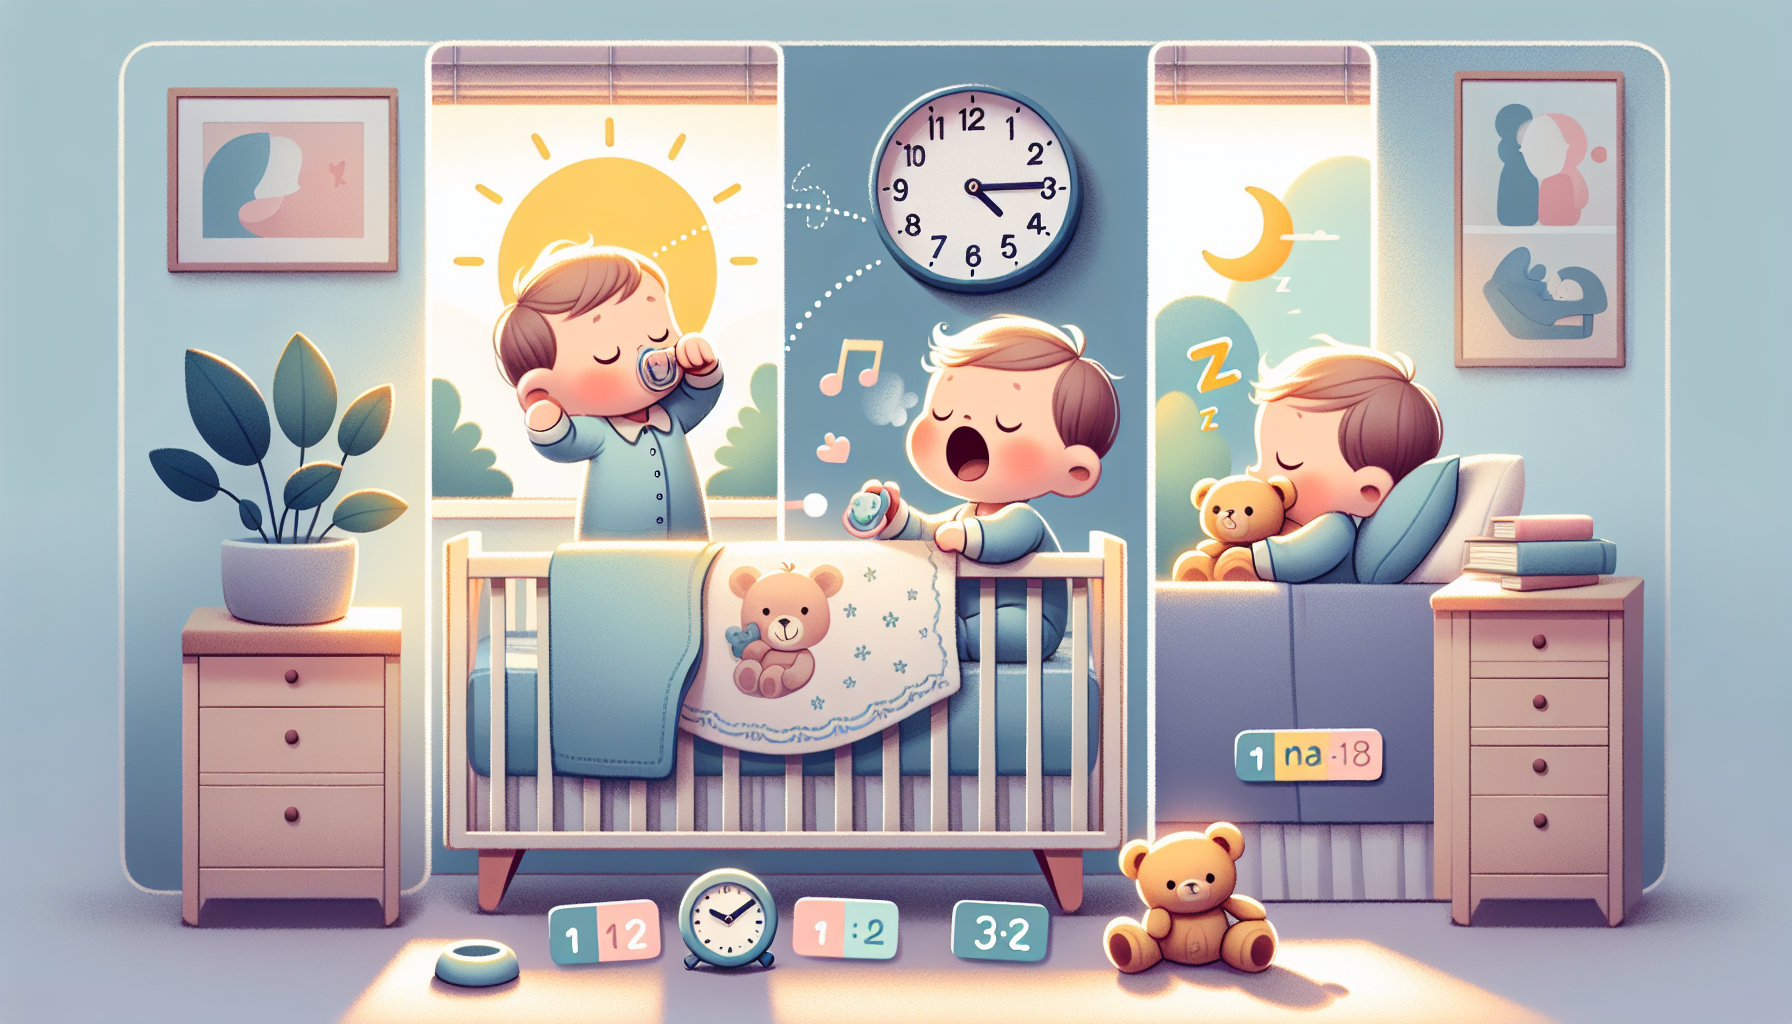 Illustration of a daily sleep schedule for a 12-month-old